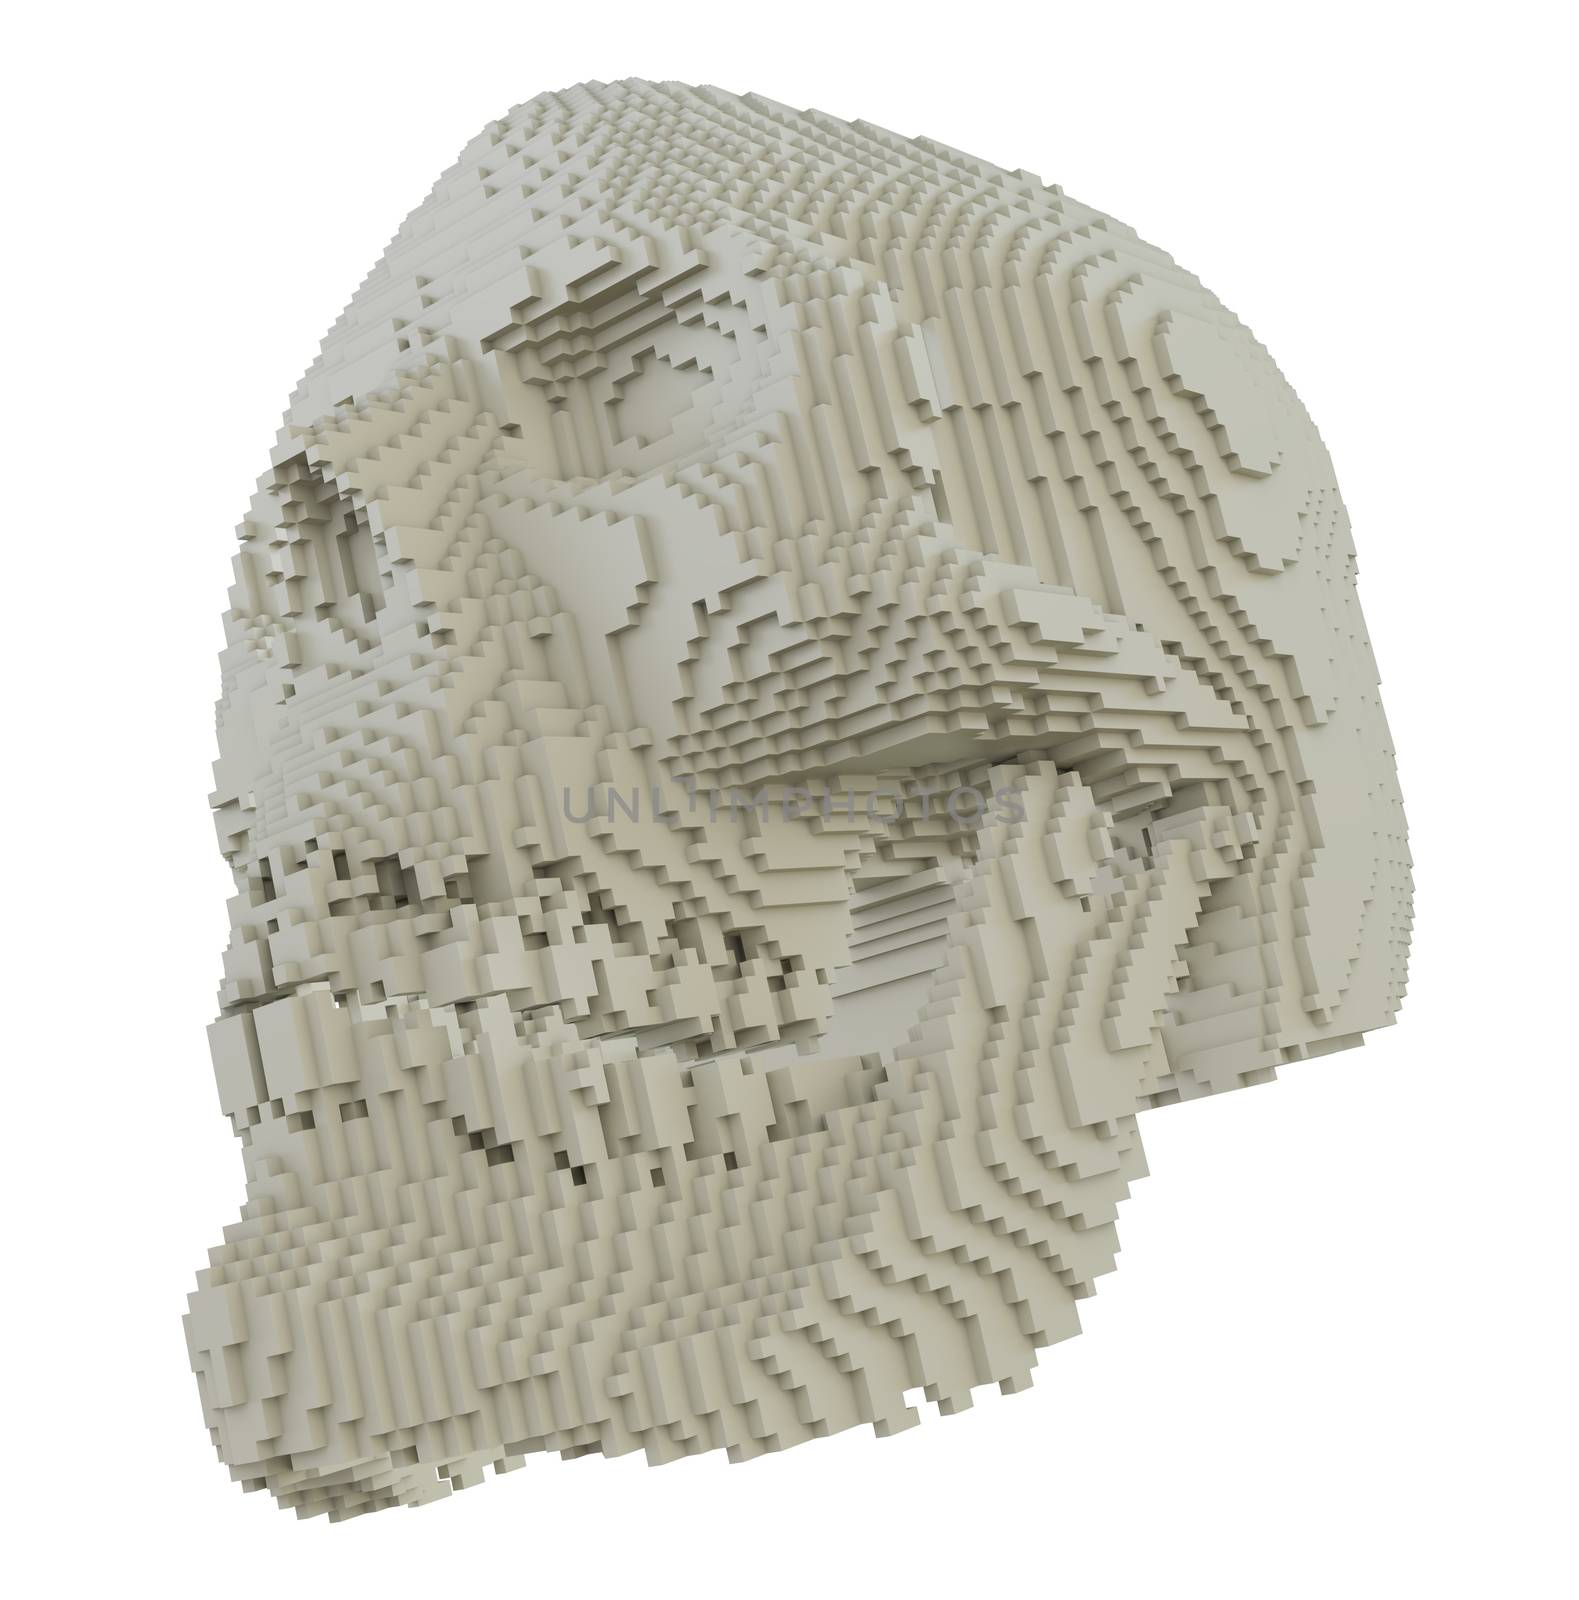 3d printed skull isolated by cherezoff